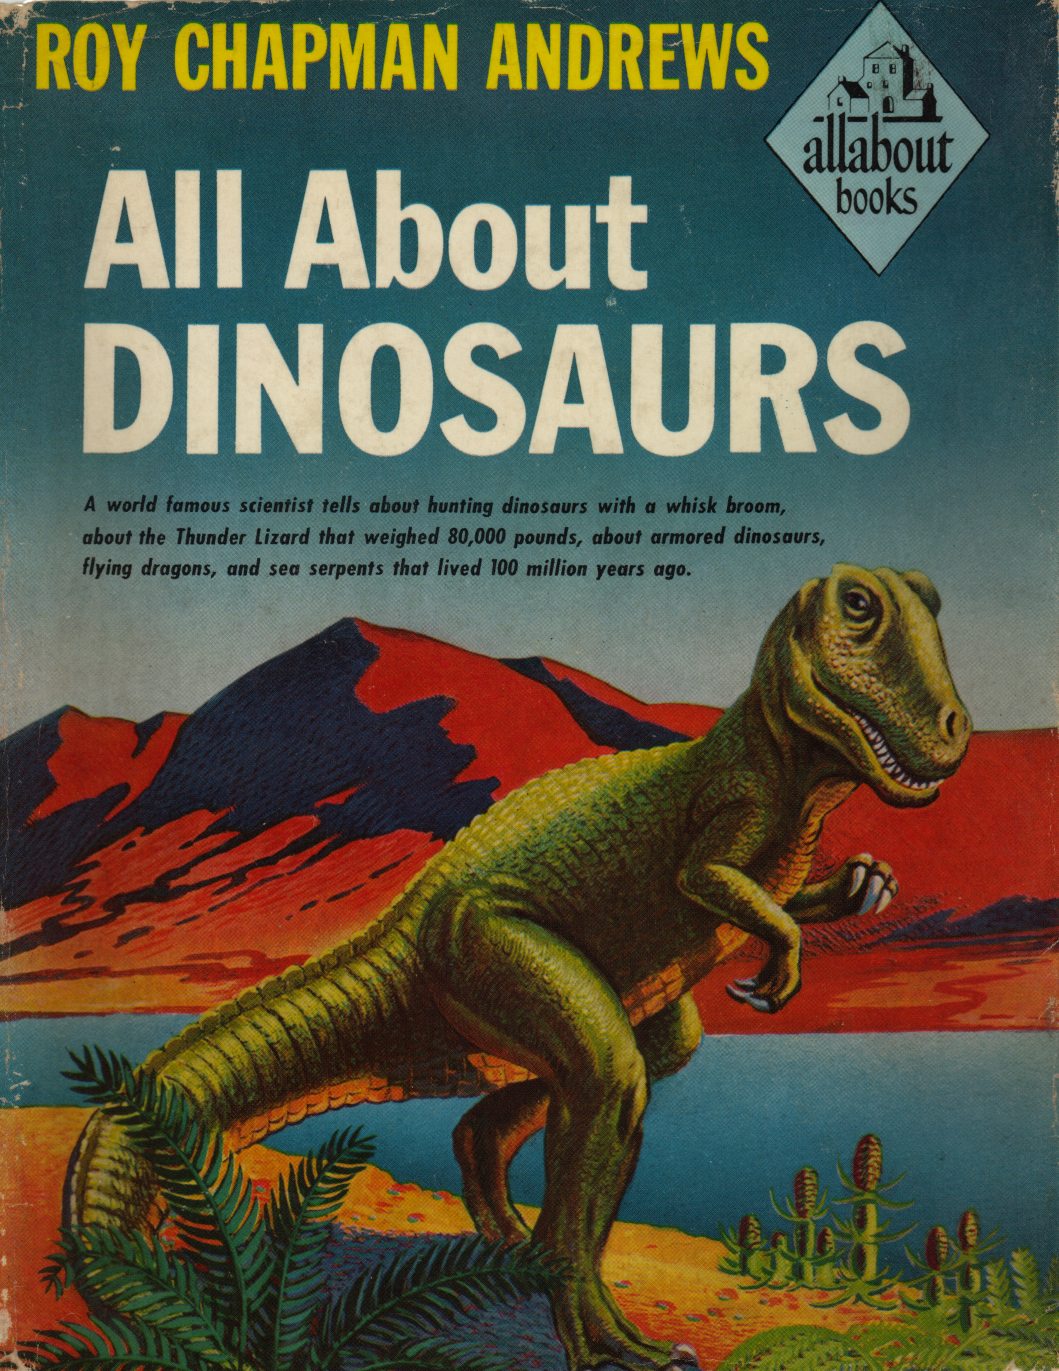 All About Dinosaurs - Roy Chapman Andrews | Clive Coy Collection